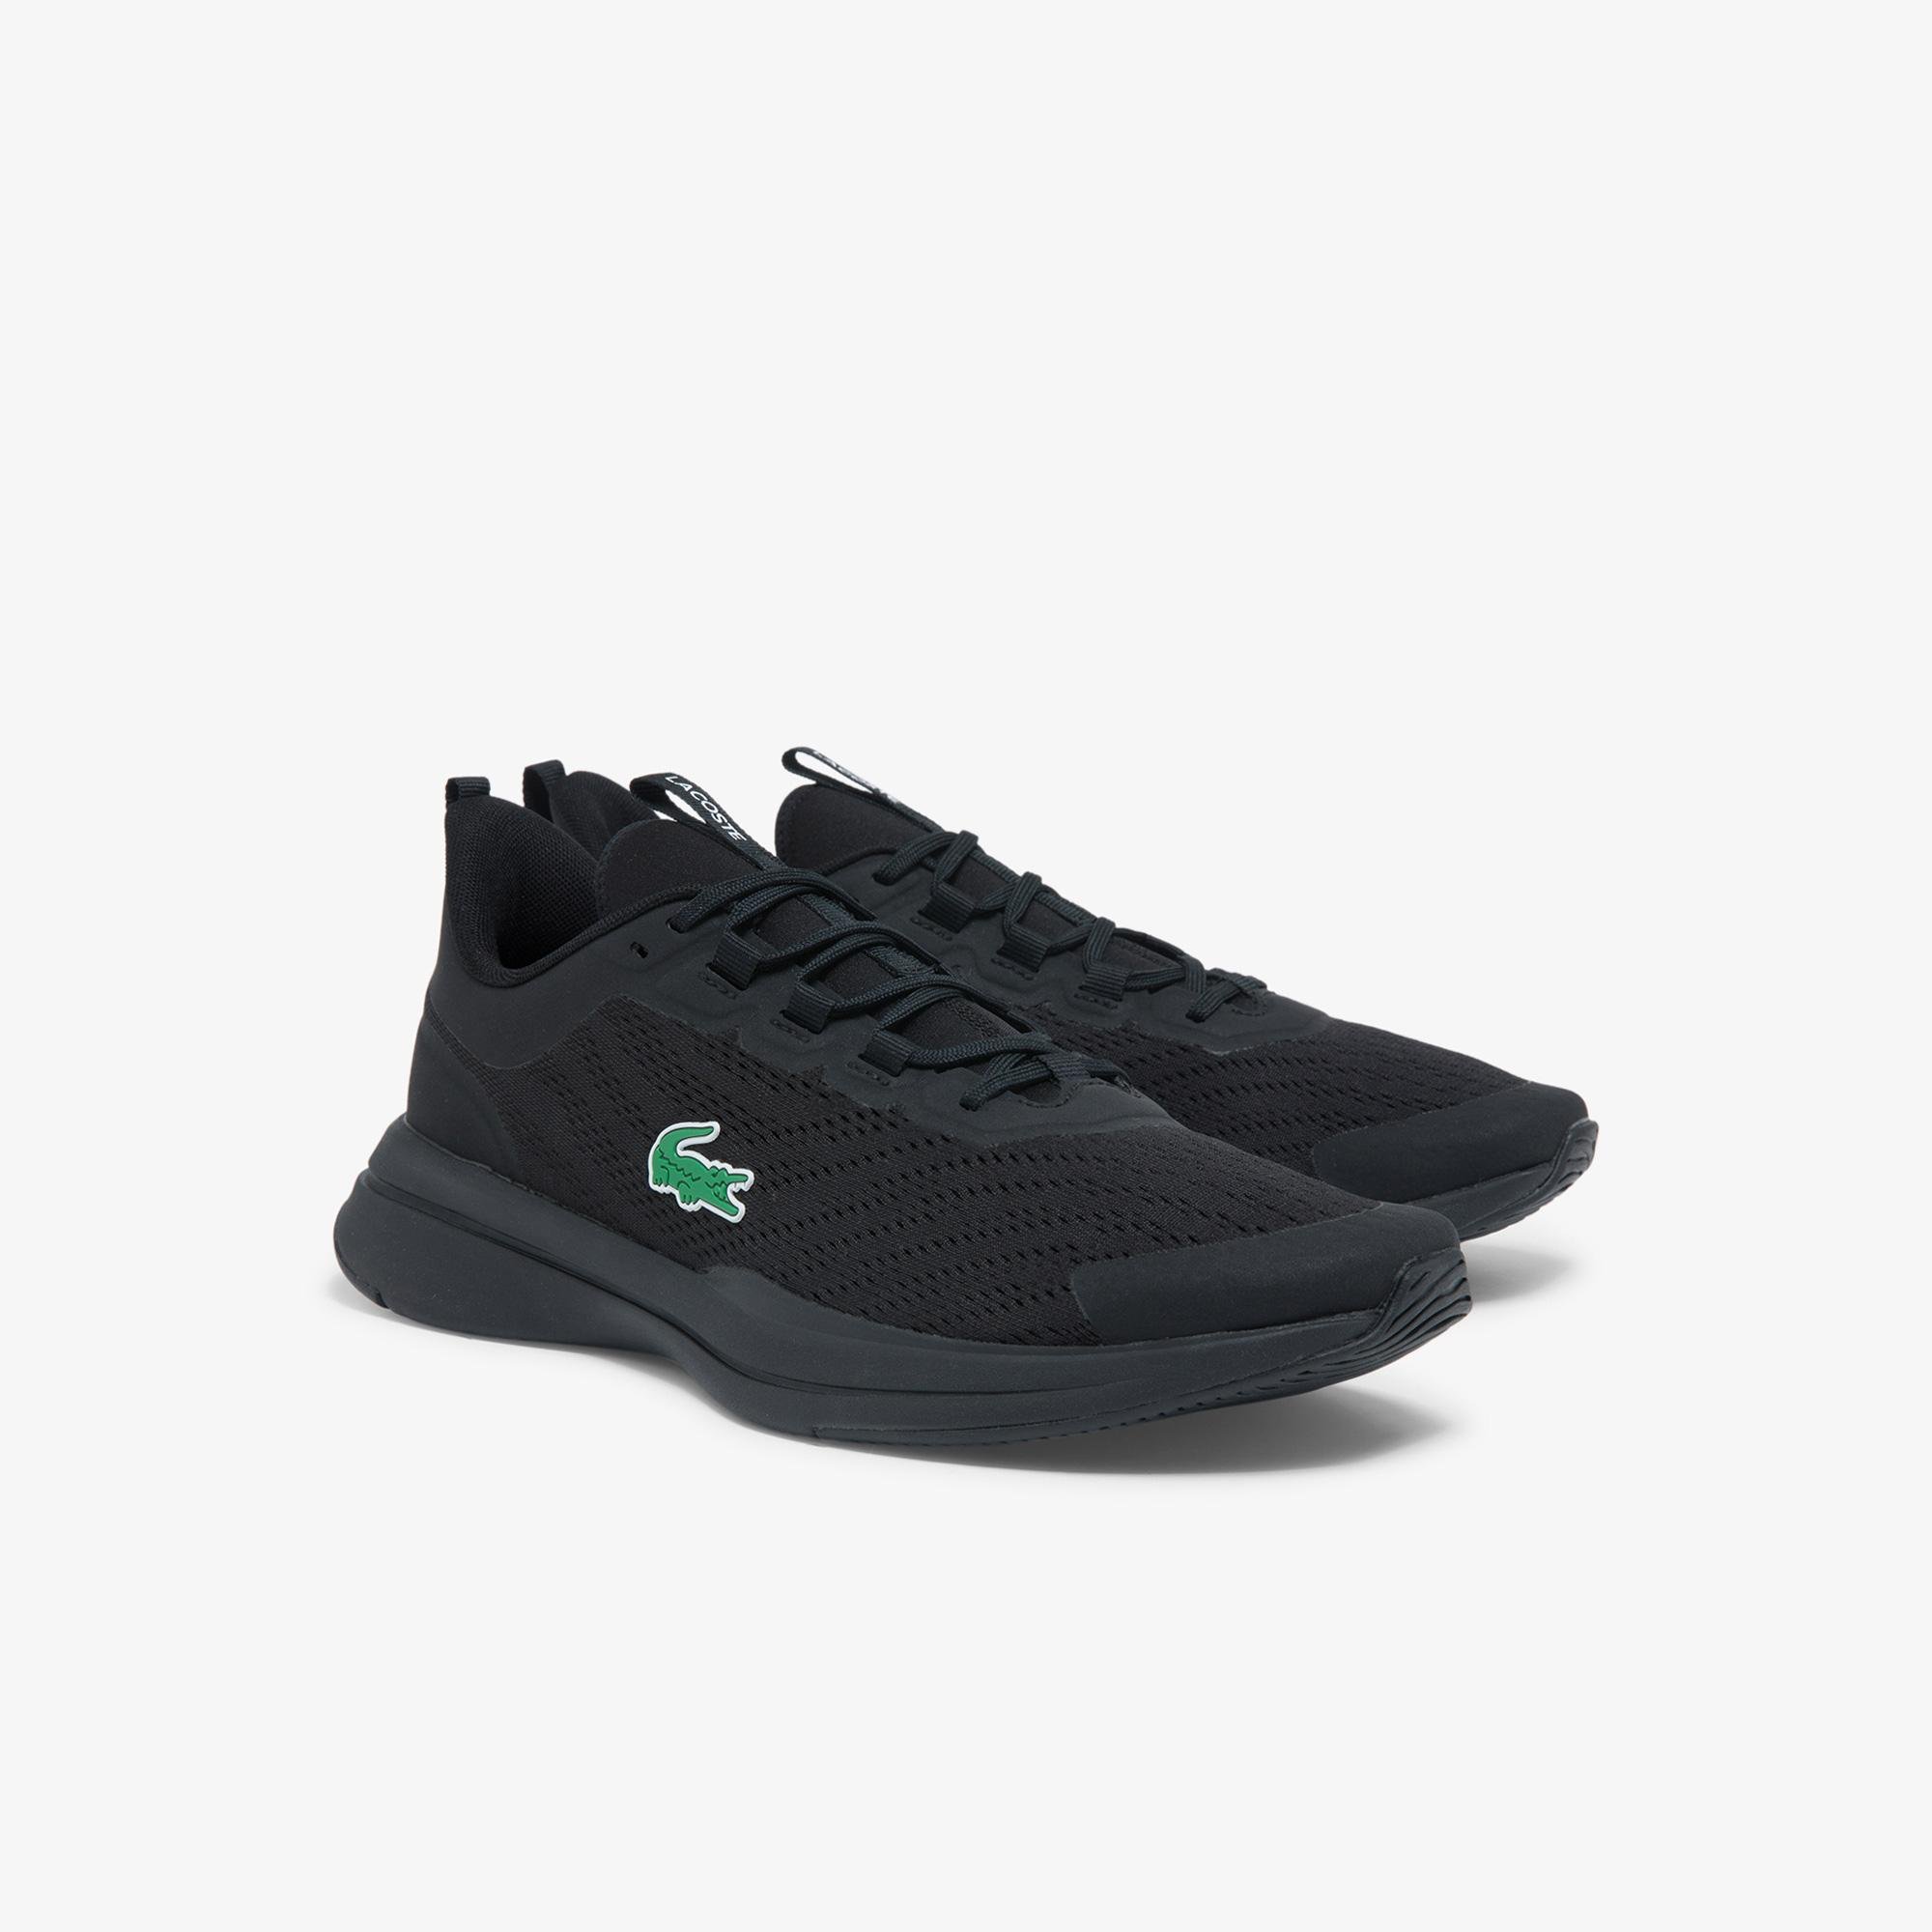 Lacoste Men's sneakers textile Run Spin Ultra